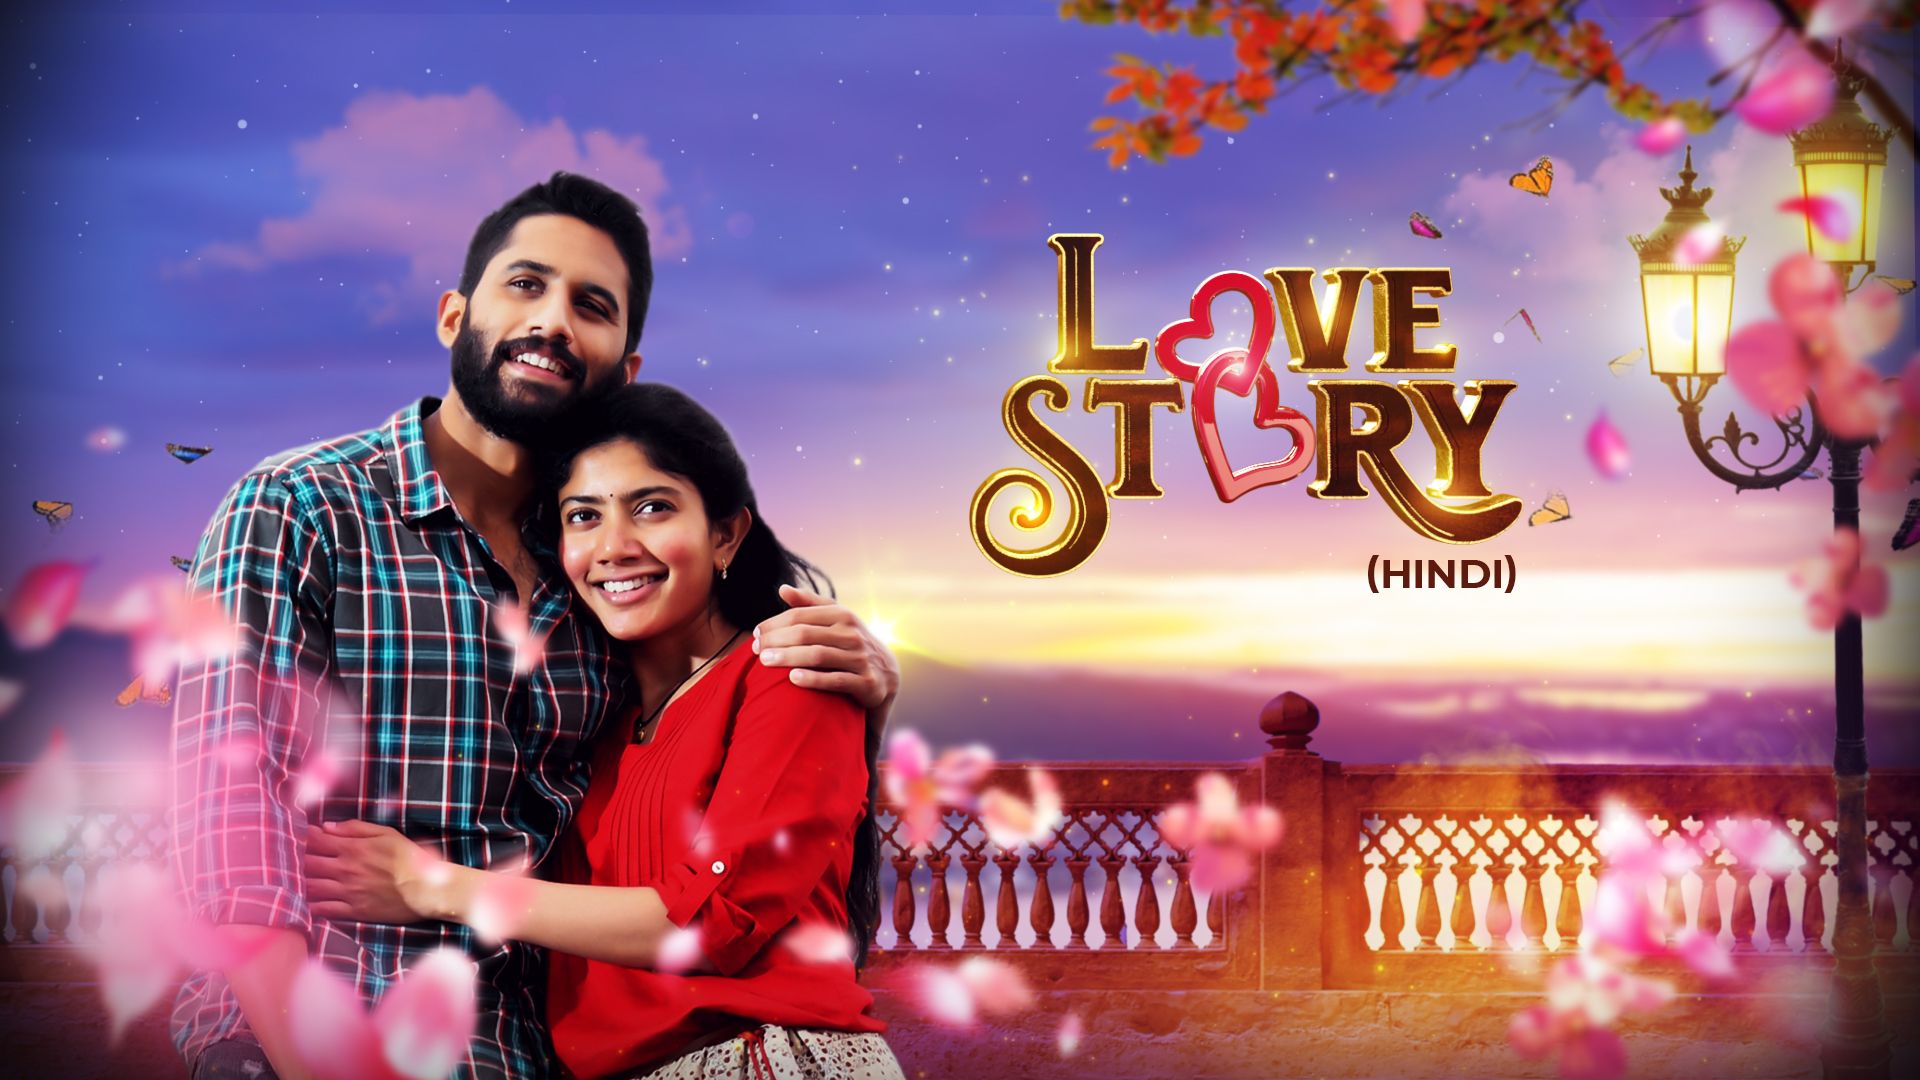 Watch Movie Love Story Only on Watcho